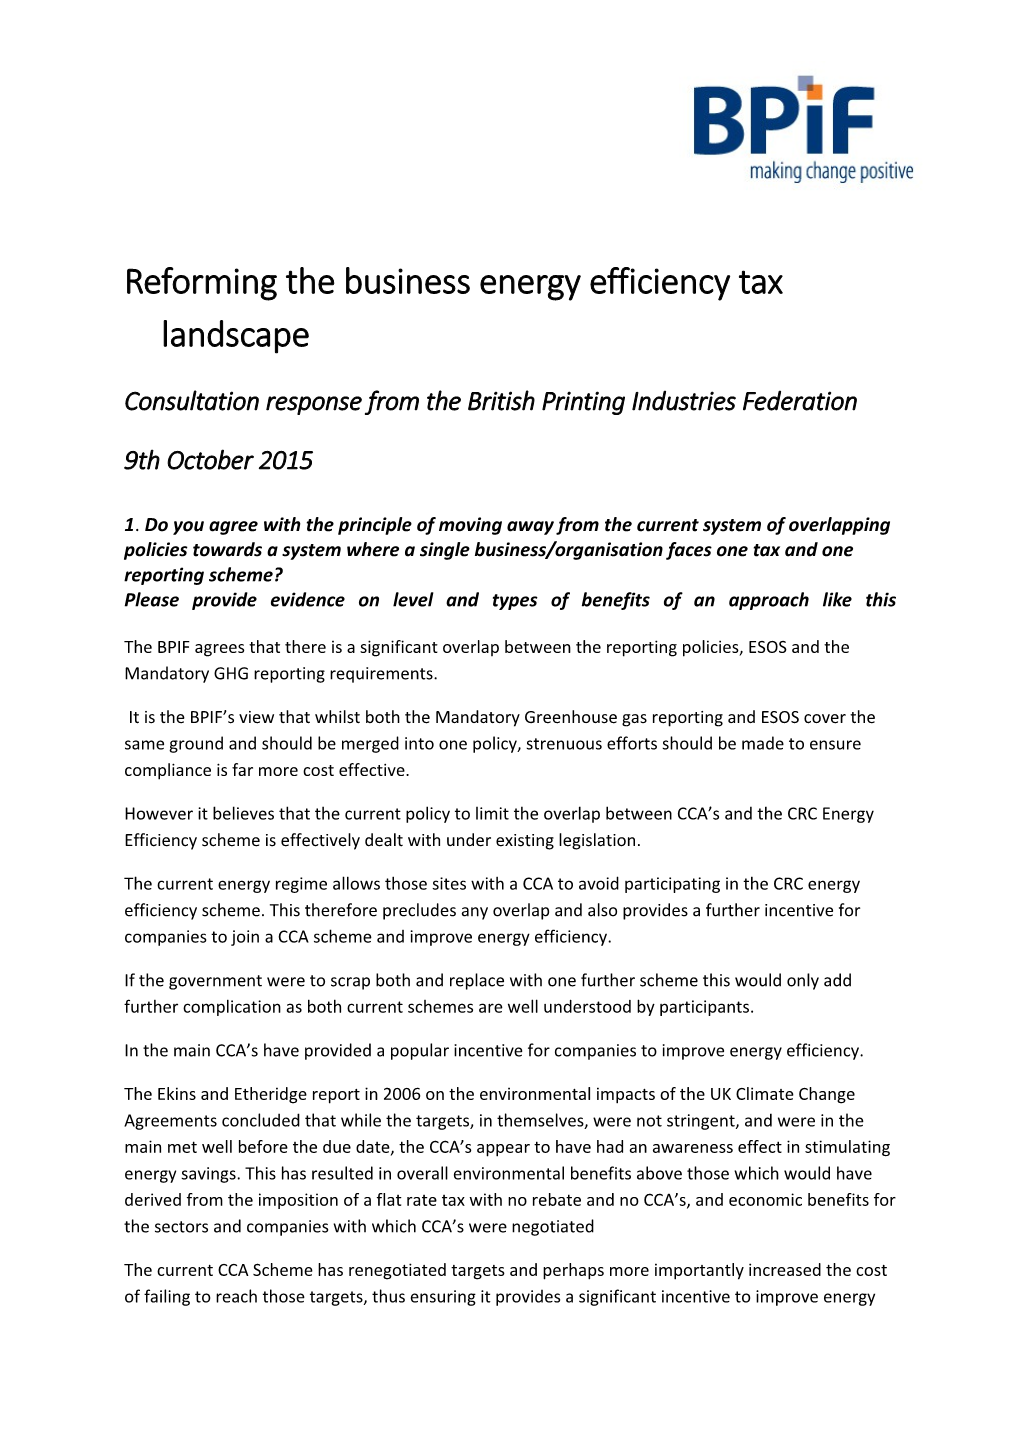 Reforming the Business Energy Efficiency Tax Landscape